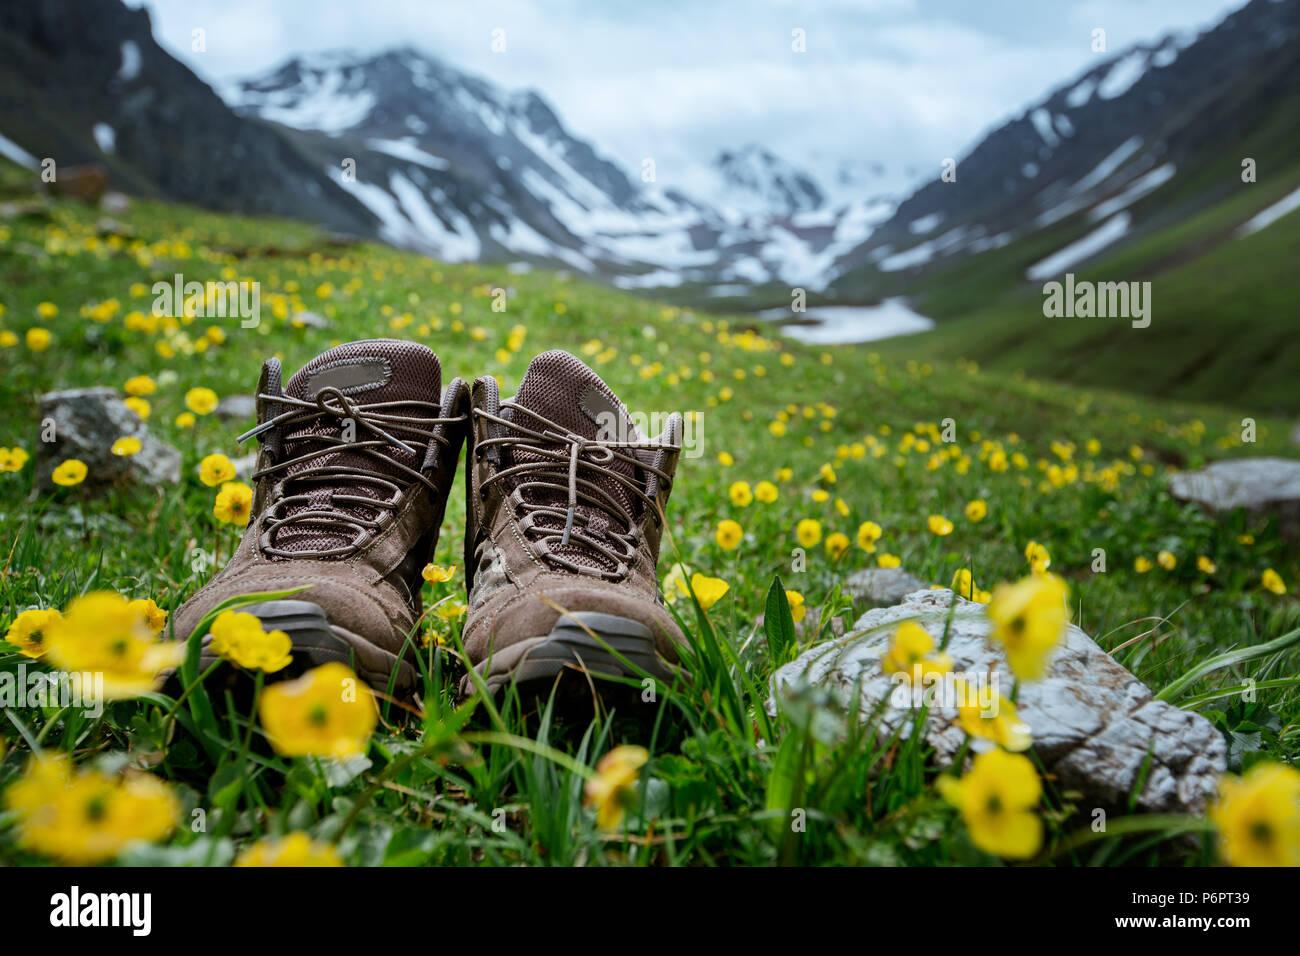 Pair of hiking boots lying in the grass Stock Photo